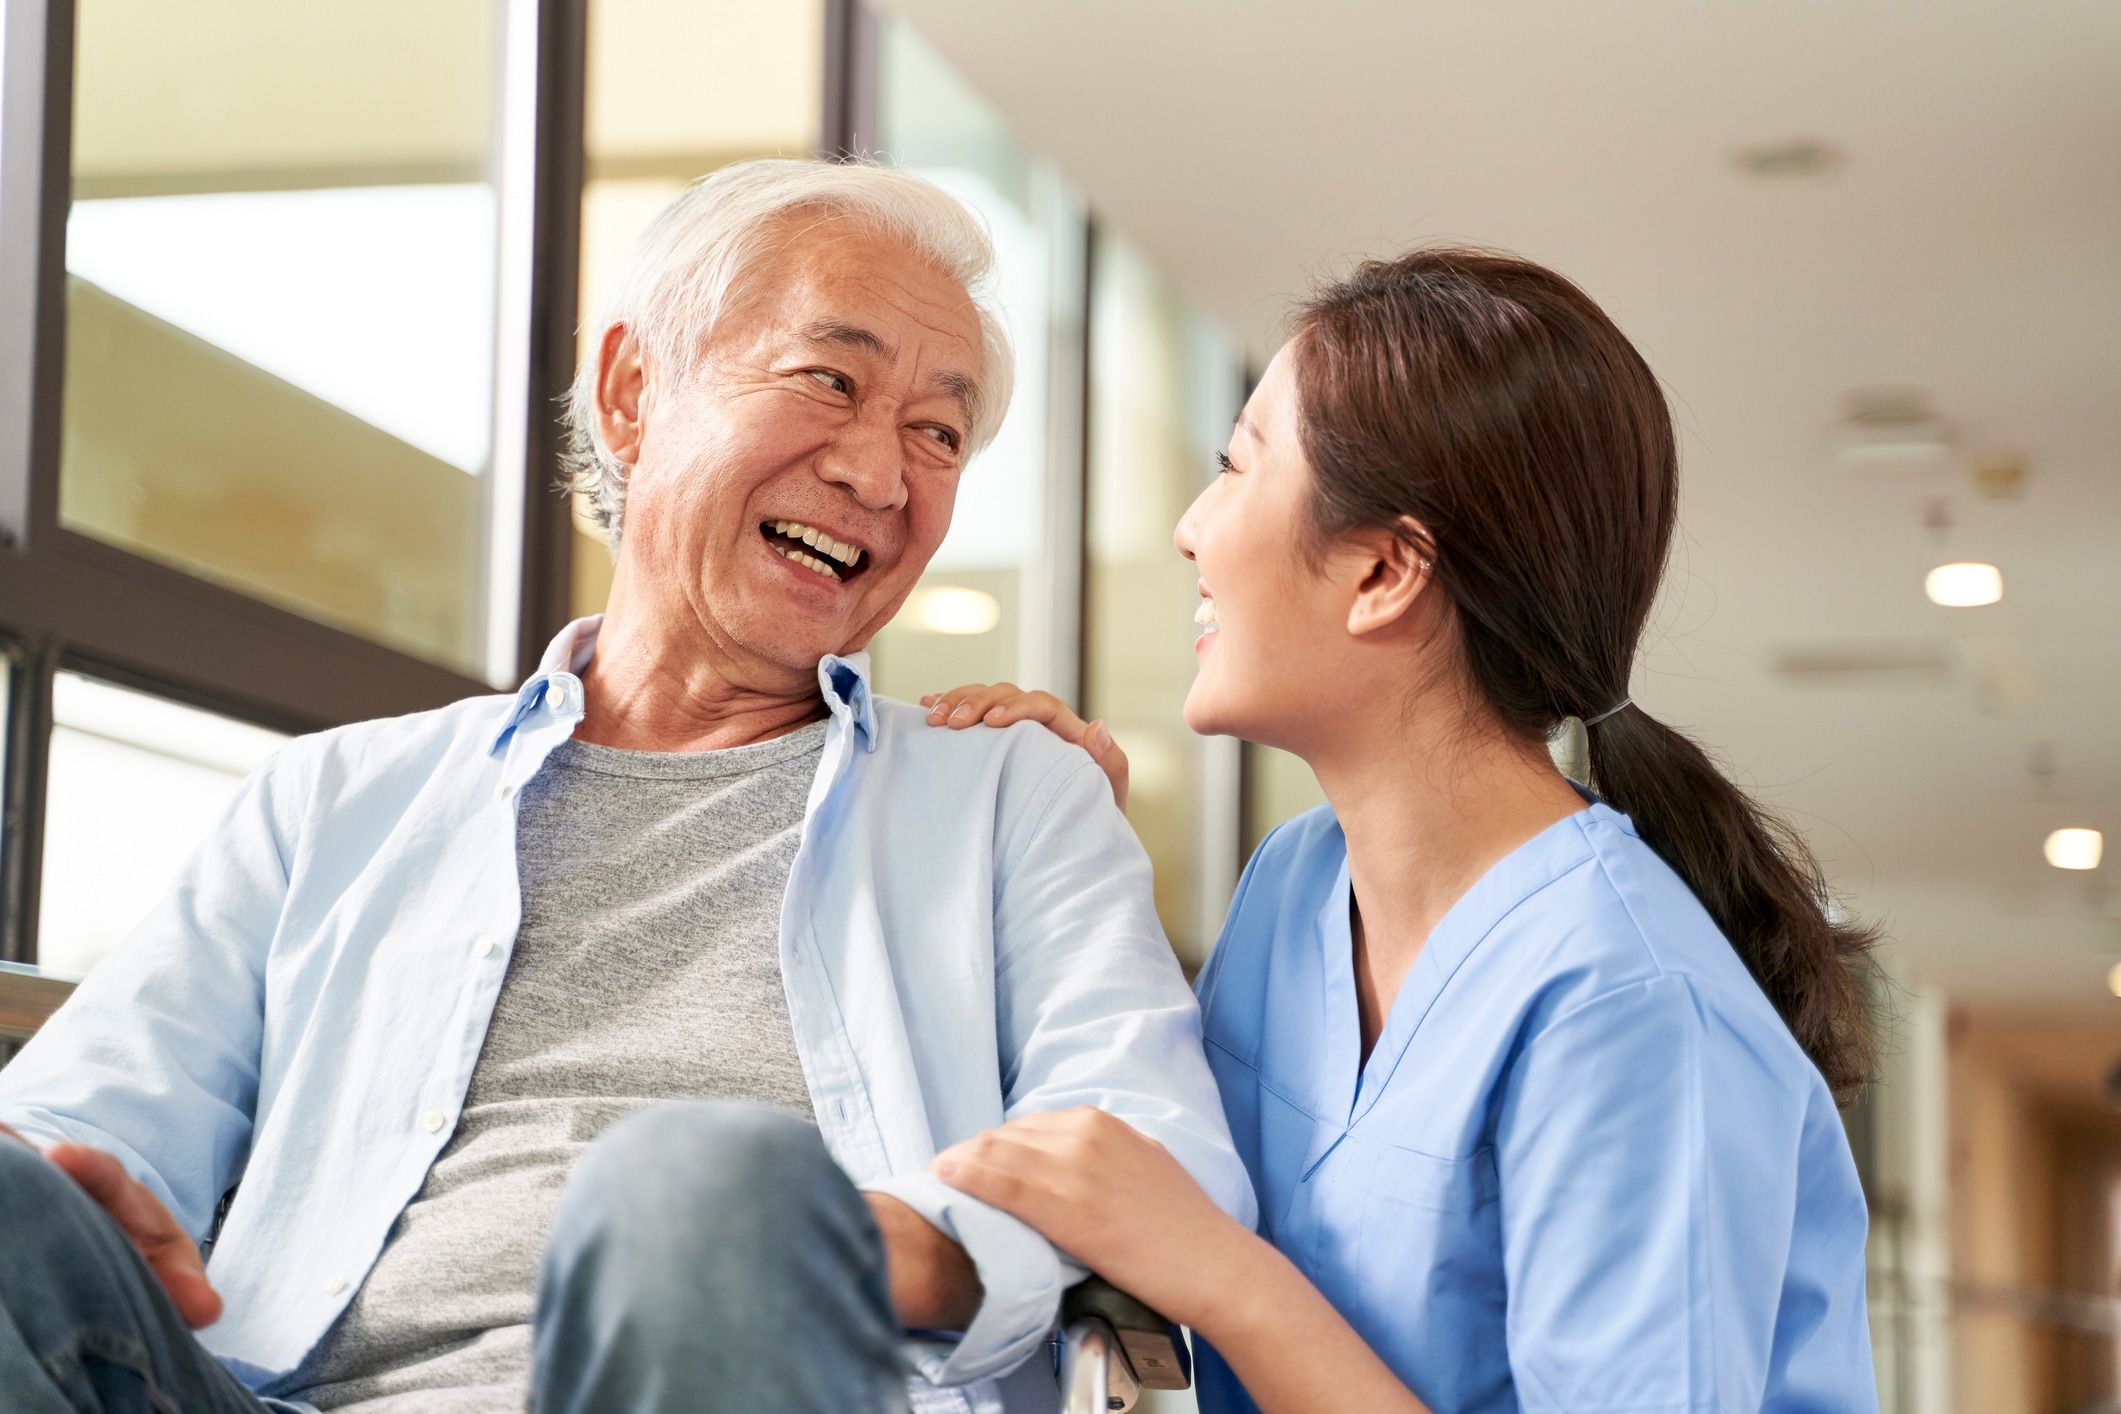 8 senior care options: How to choose the best fit for your aging loved one